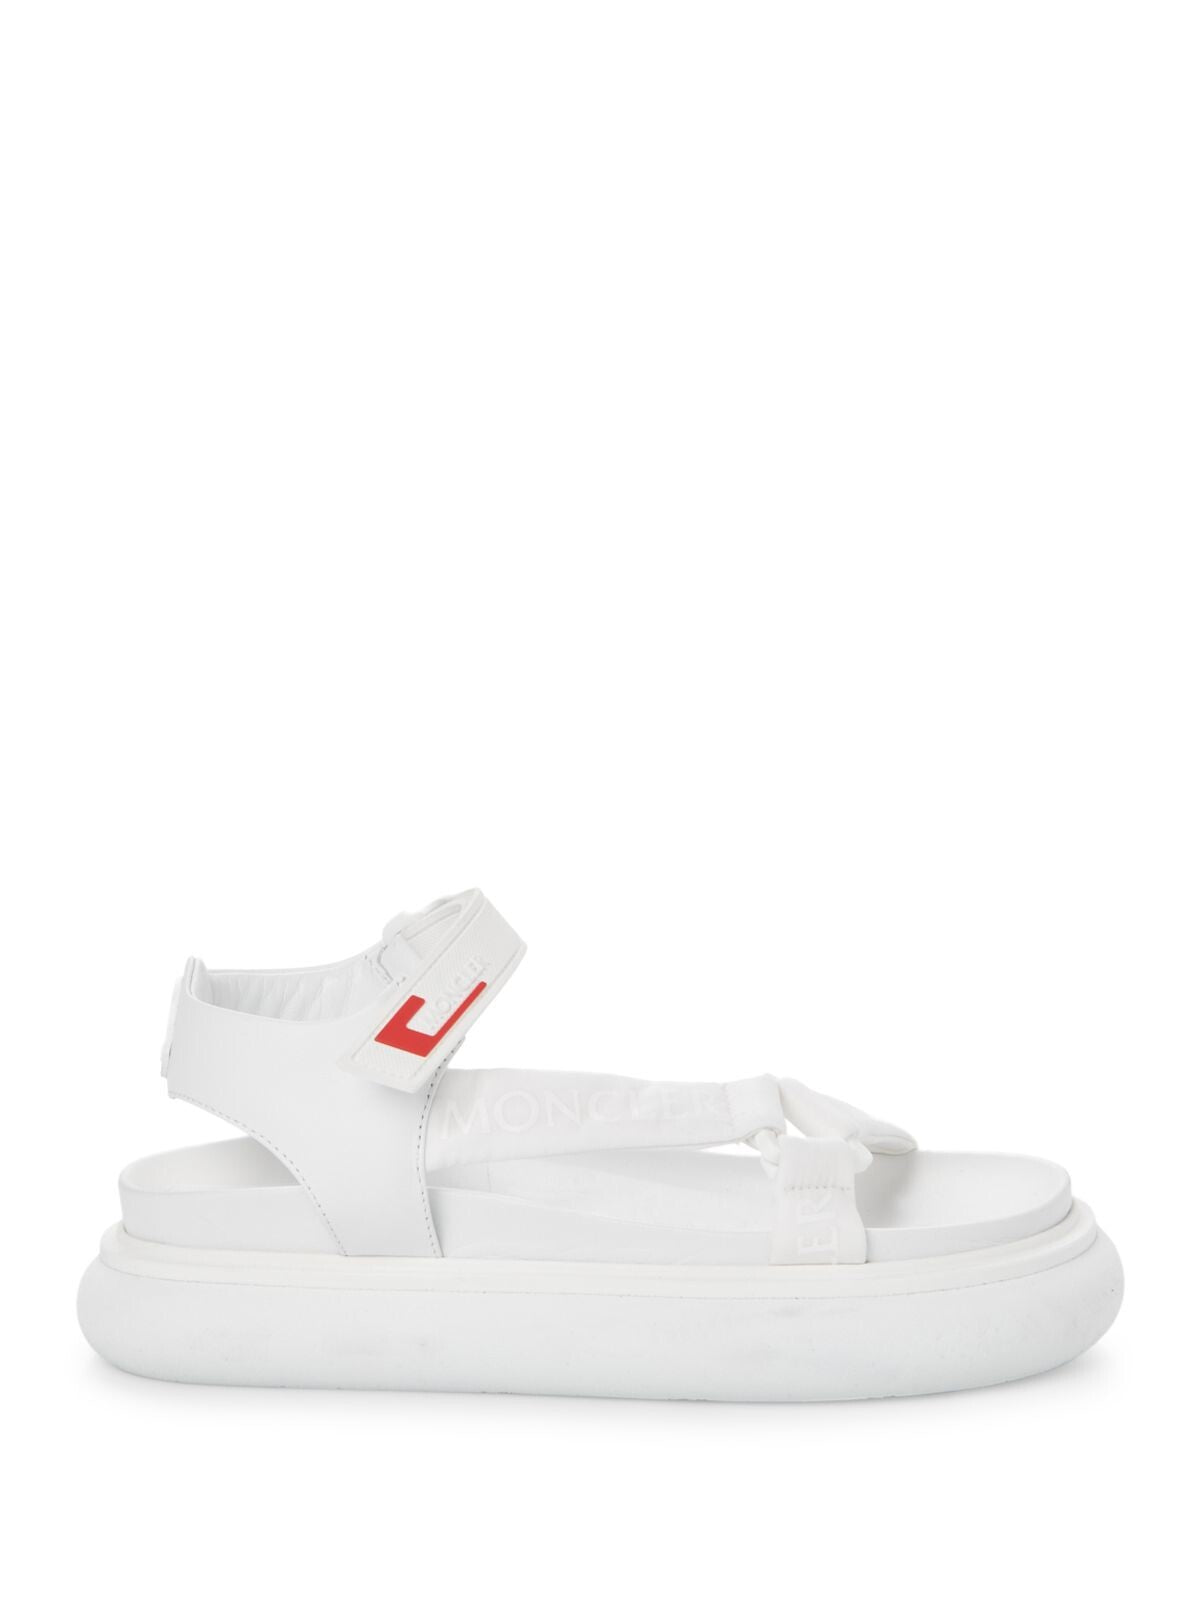 MONCLER Womens White Logo Asymmetrical Arch Support Catura Round Toe Wedge Leather Sandals 35